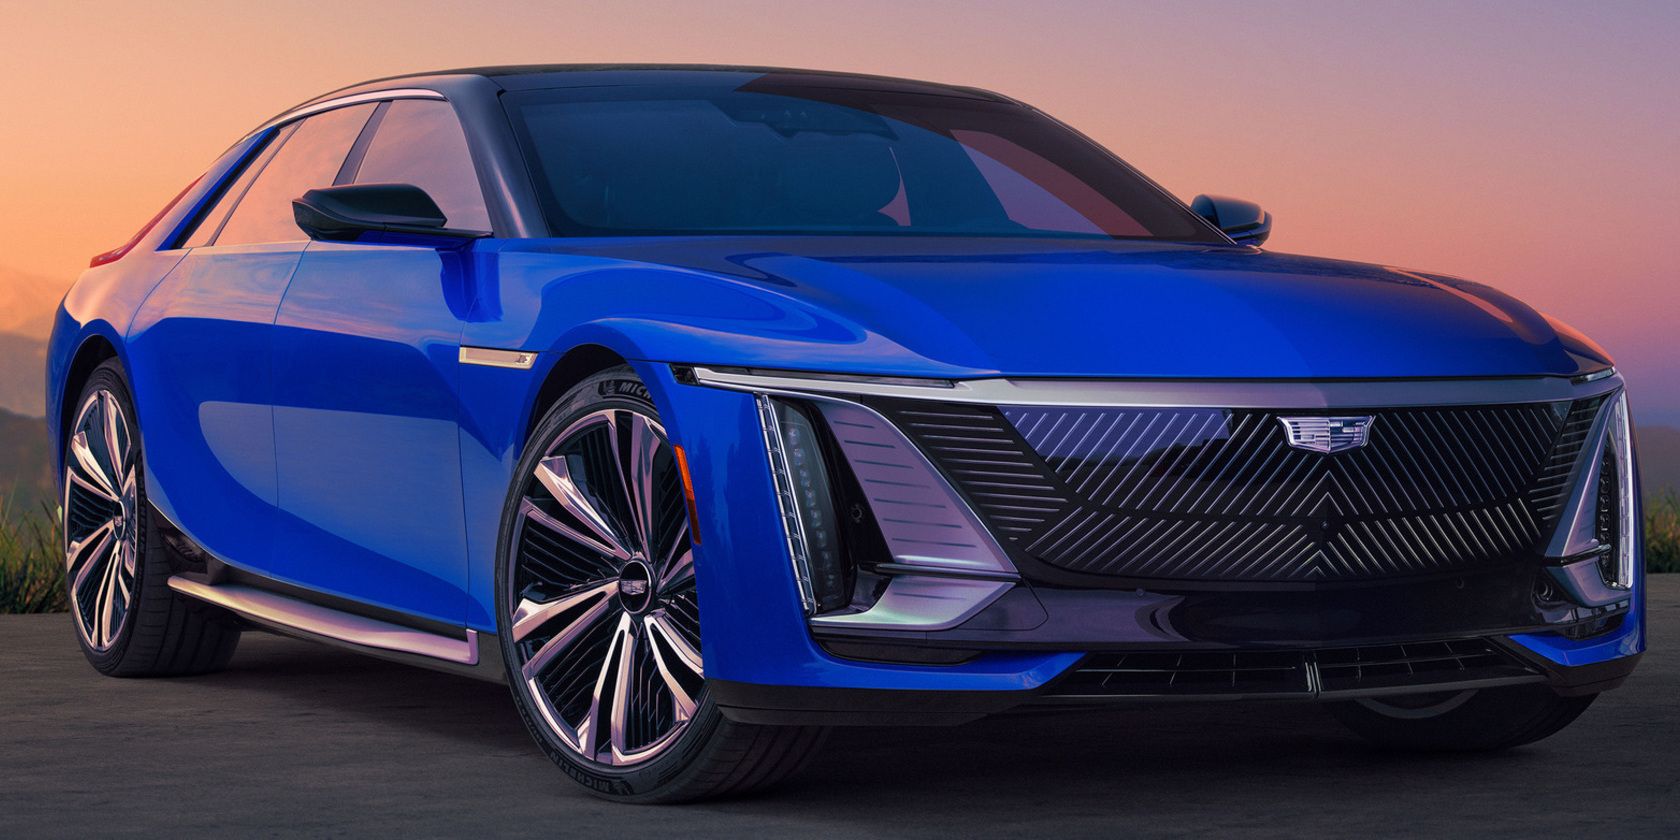 General Motors Will Launch These 5 Electric Vehicles in 2023